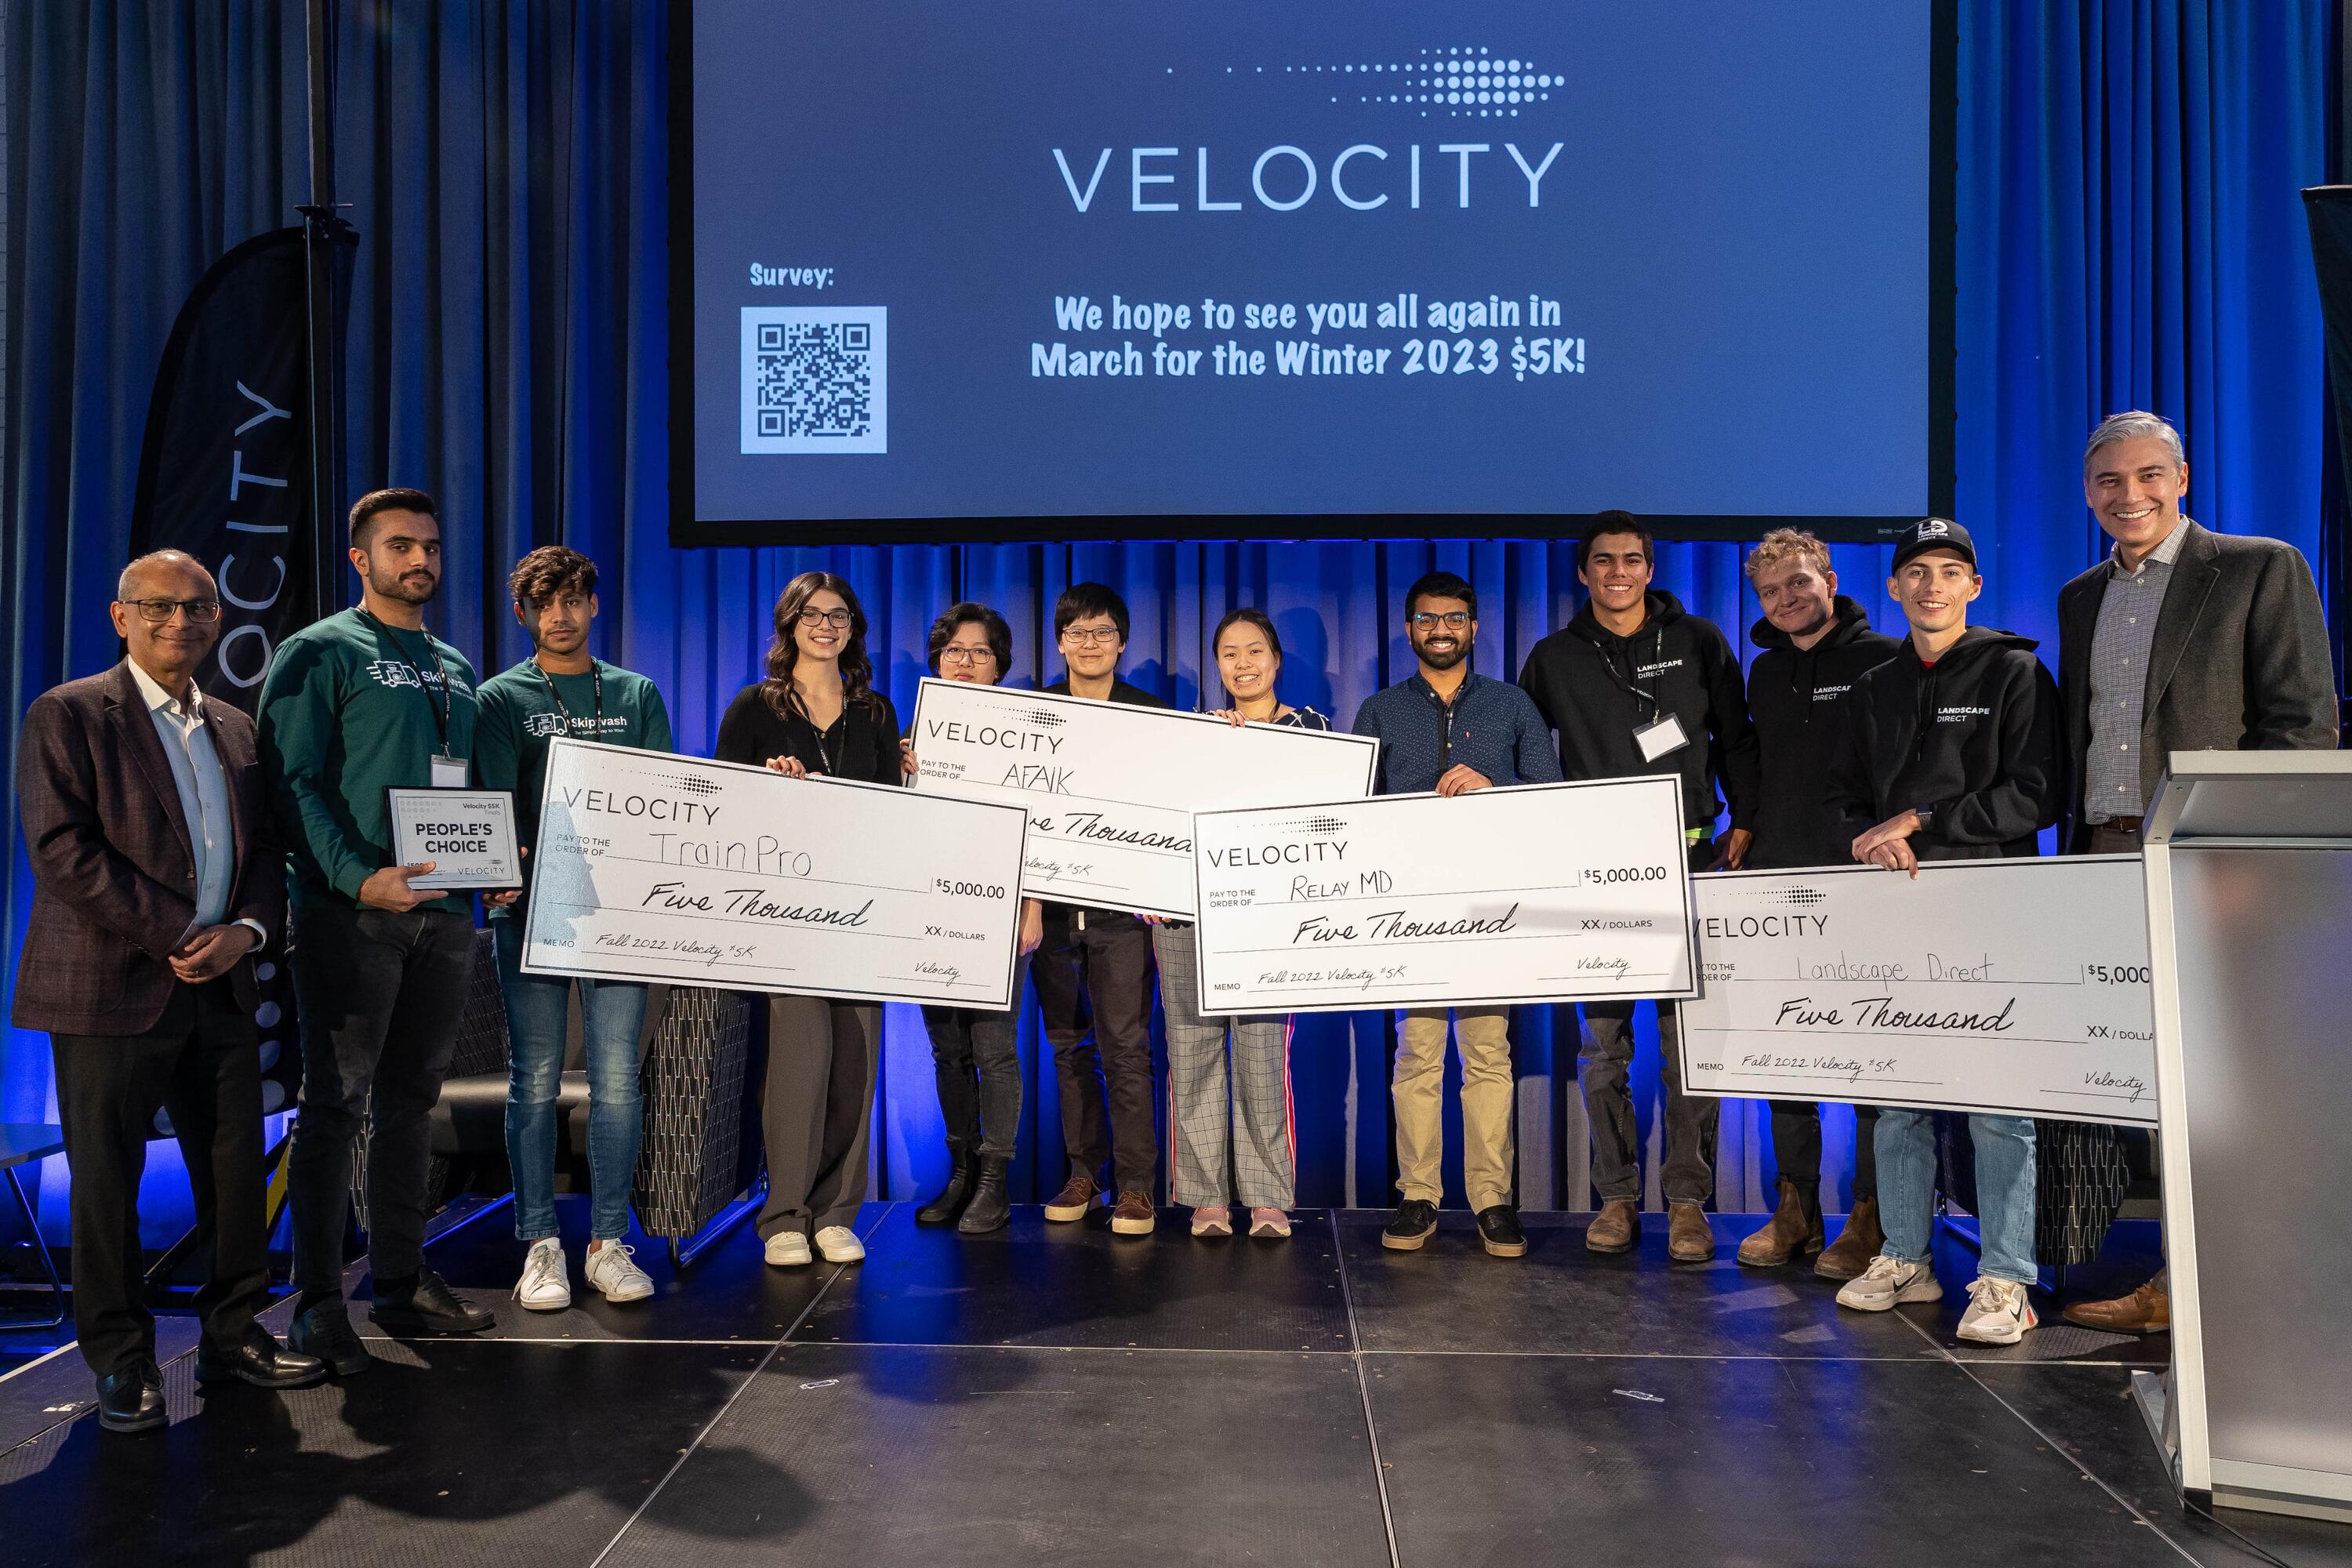 Four student teams holding novelty checks pose on a stage